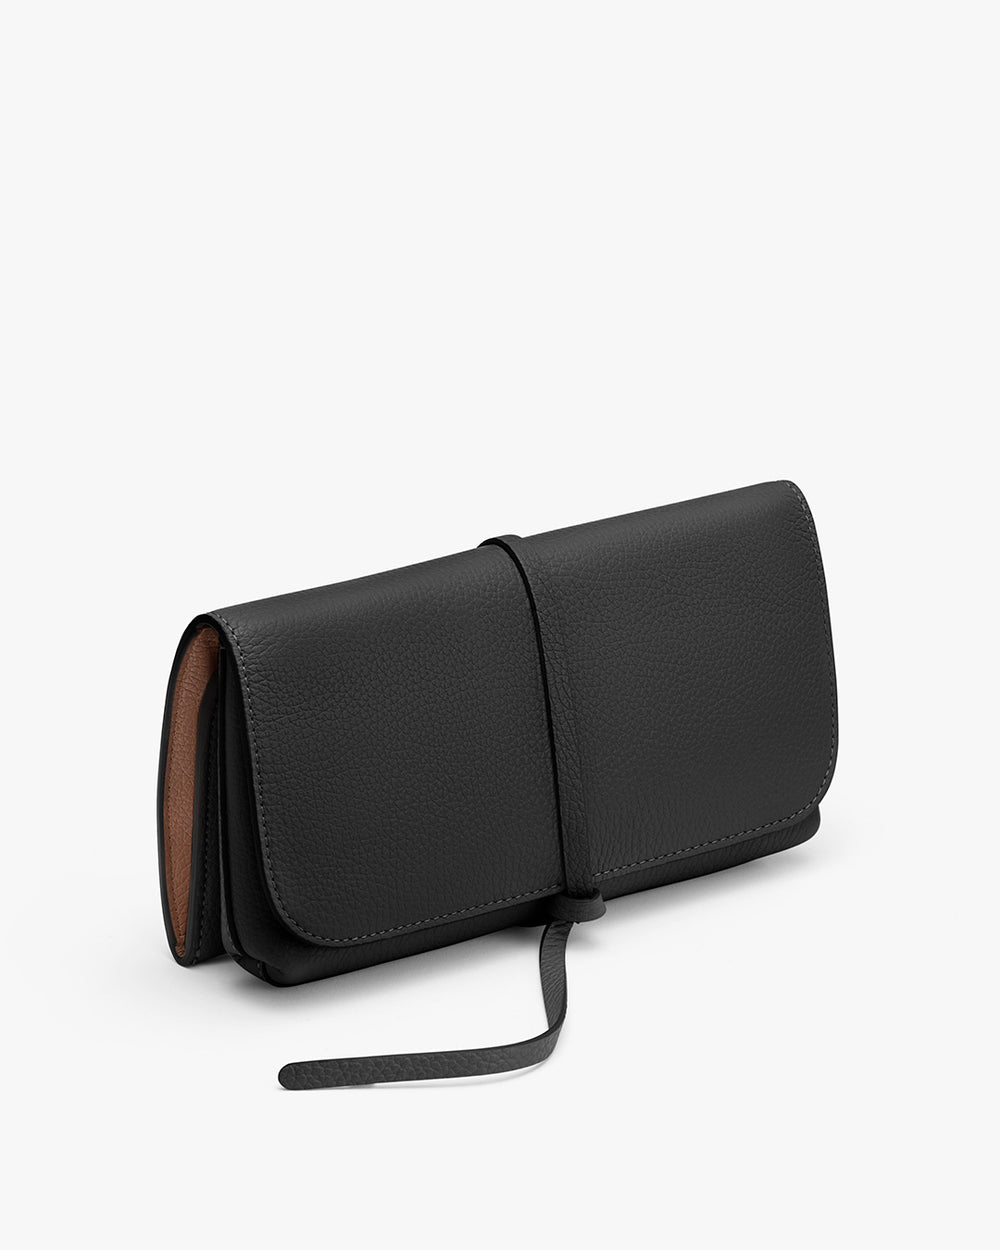 Closed clutch bag with a loop closure on a plain background.